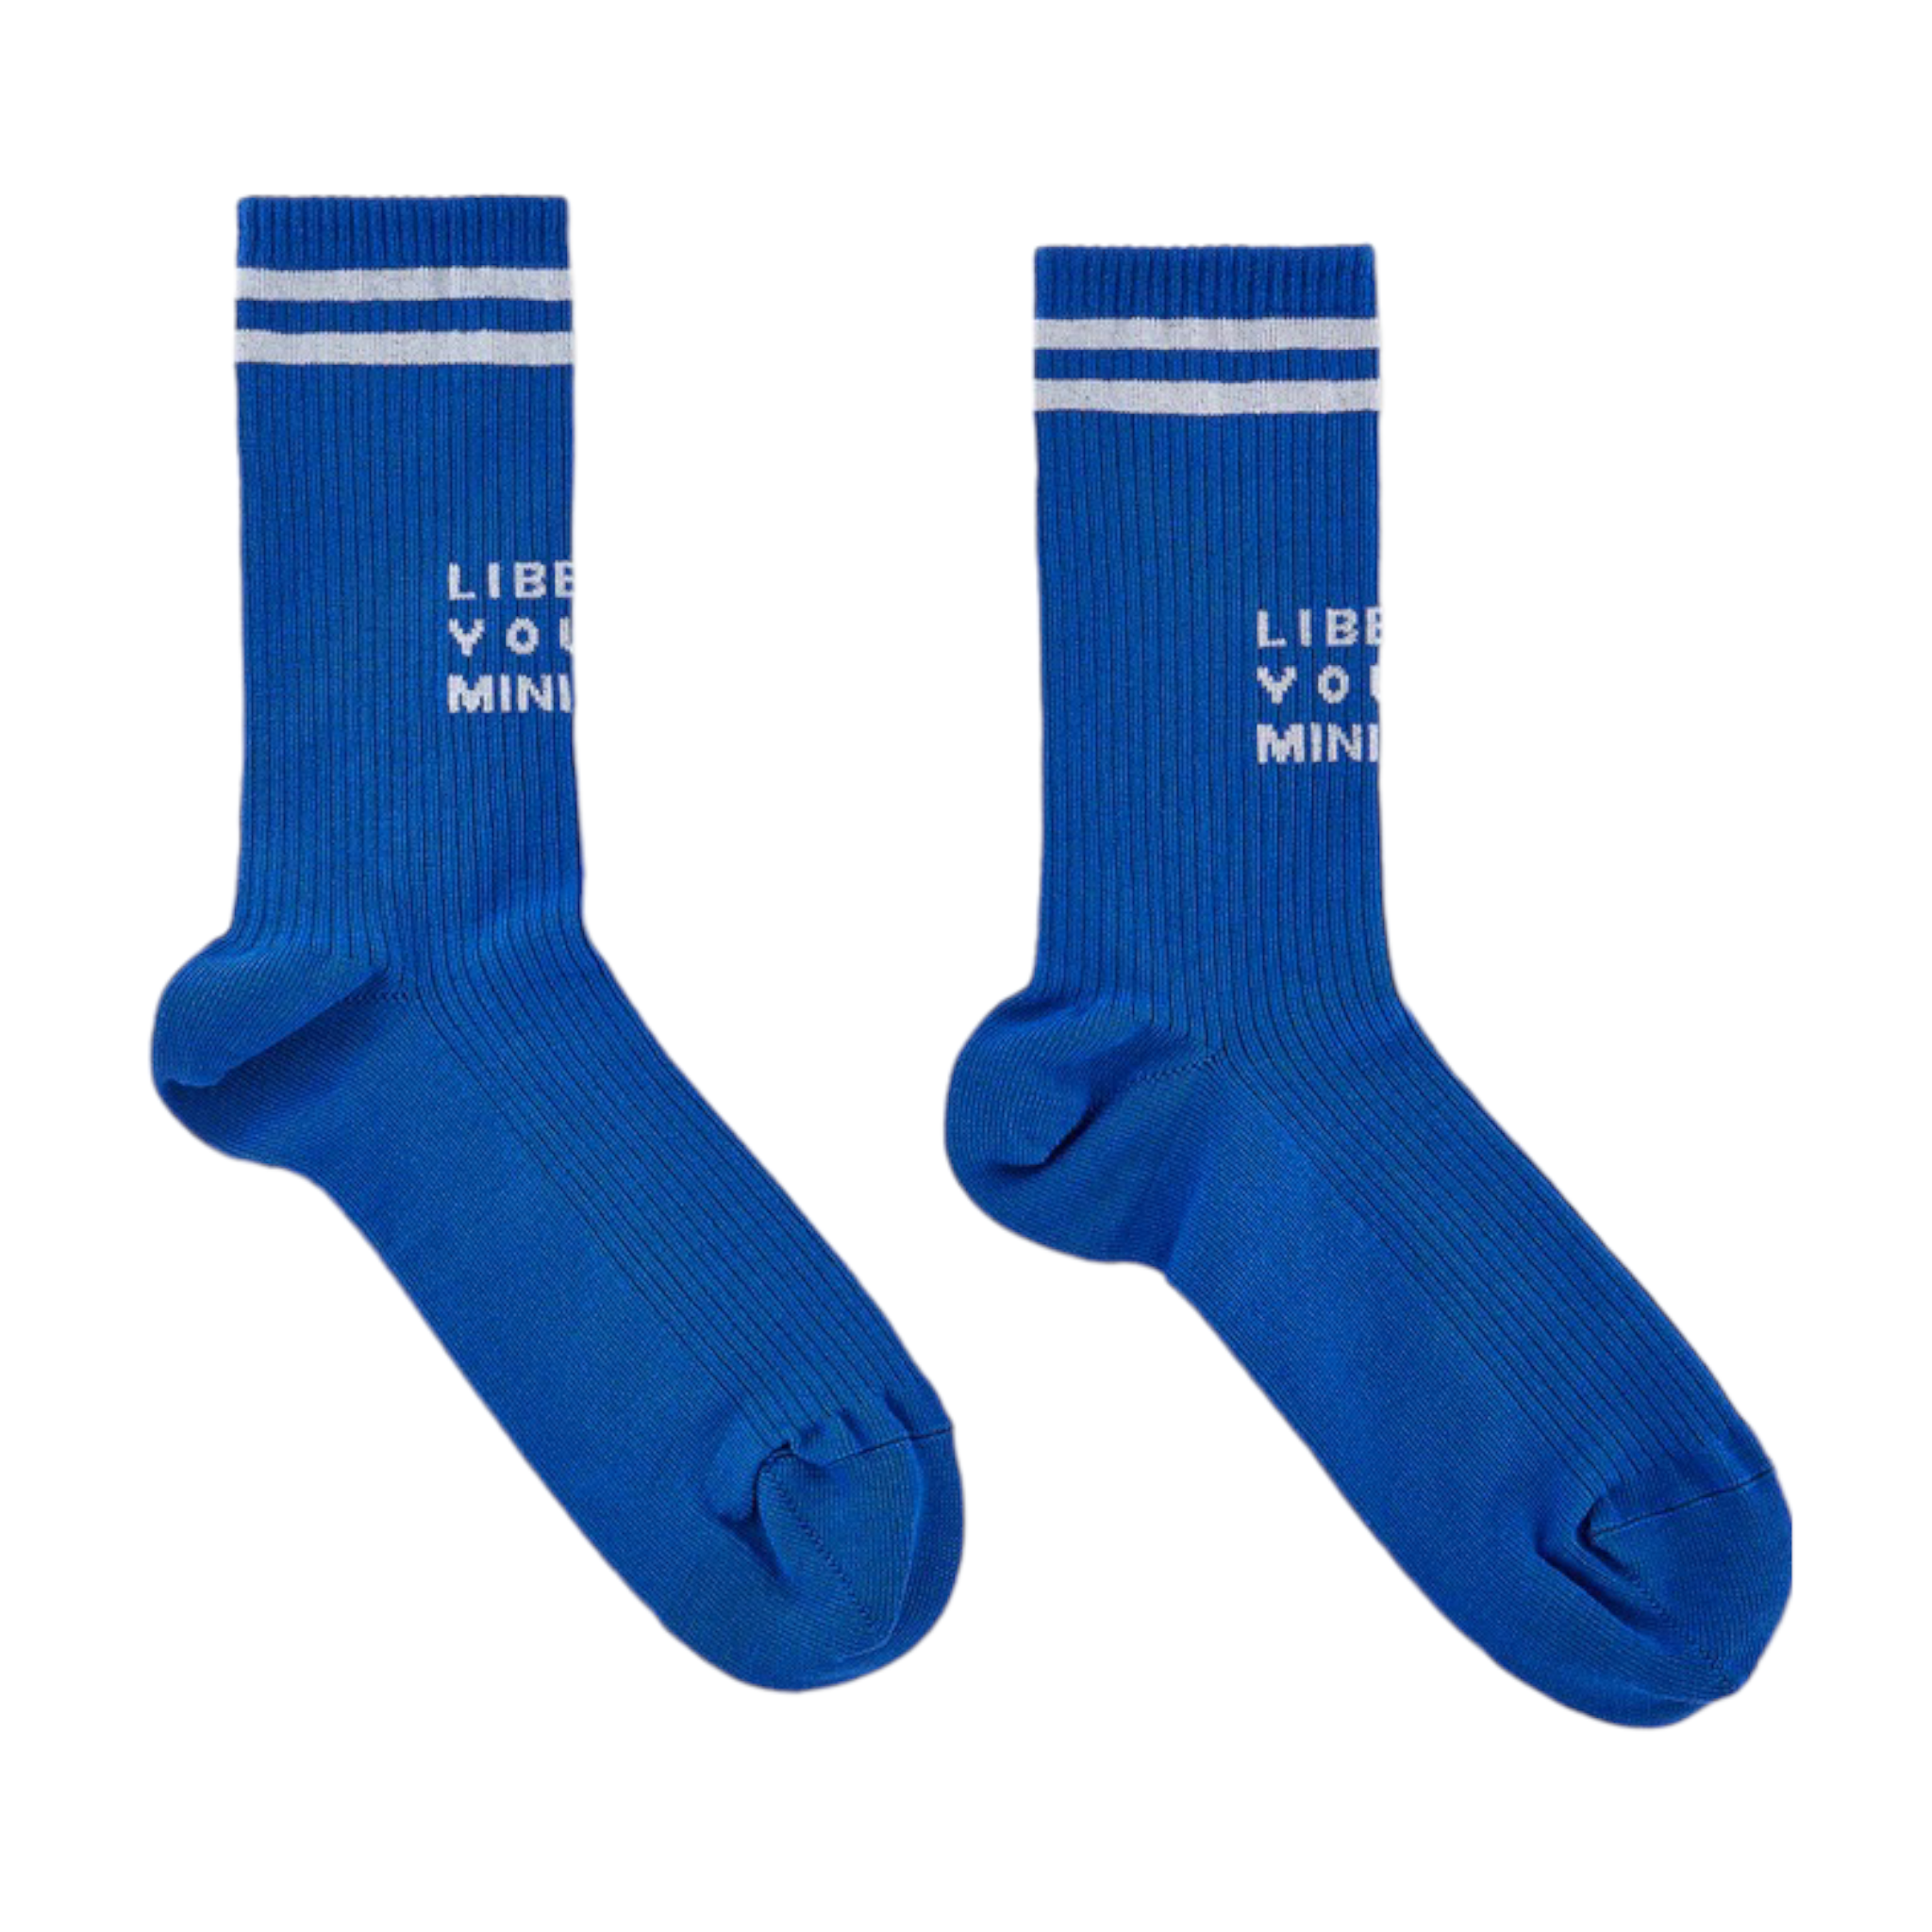 Soccer Sock Blue -  Liberal Youth Ministry